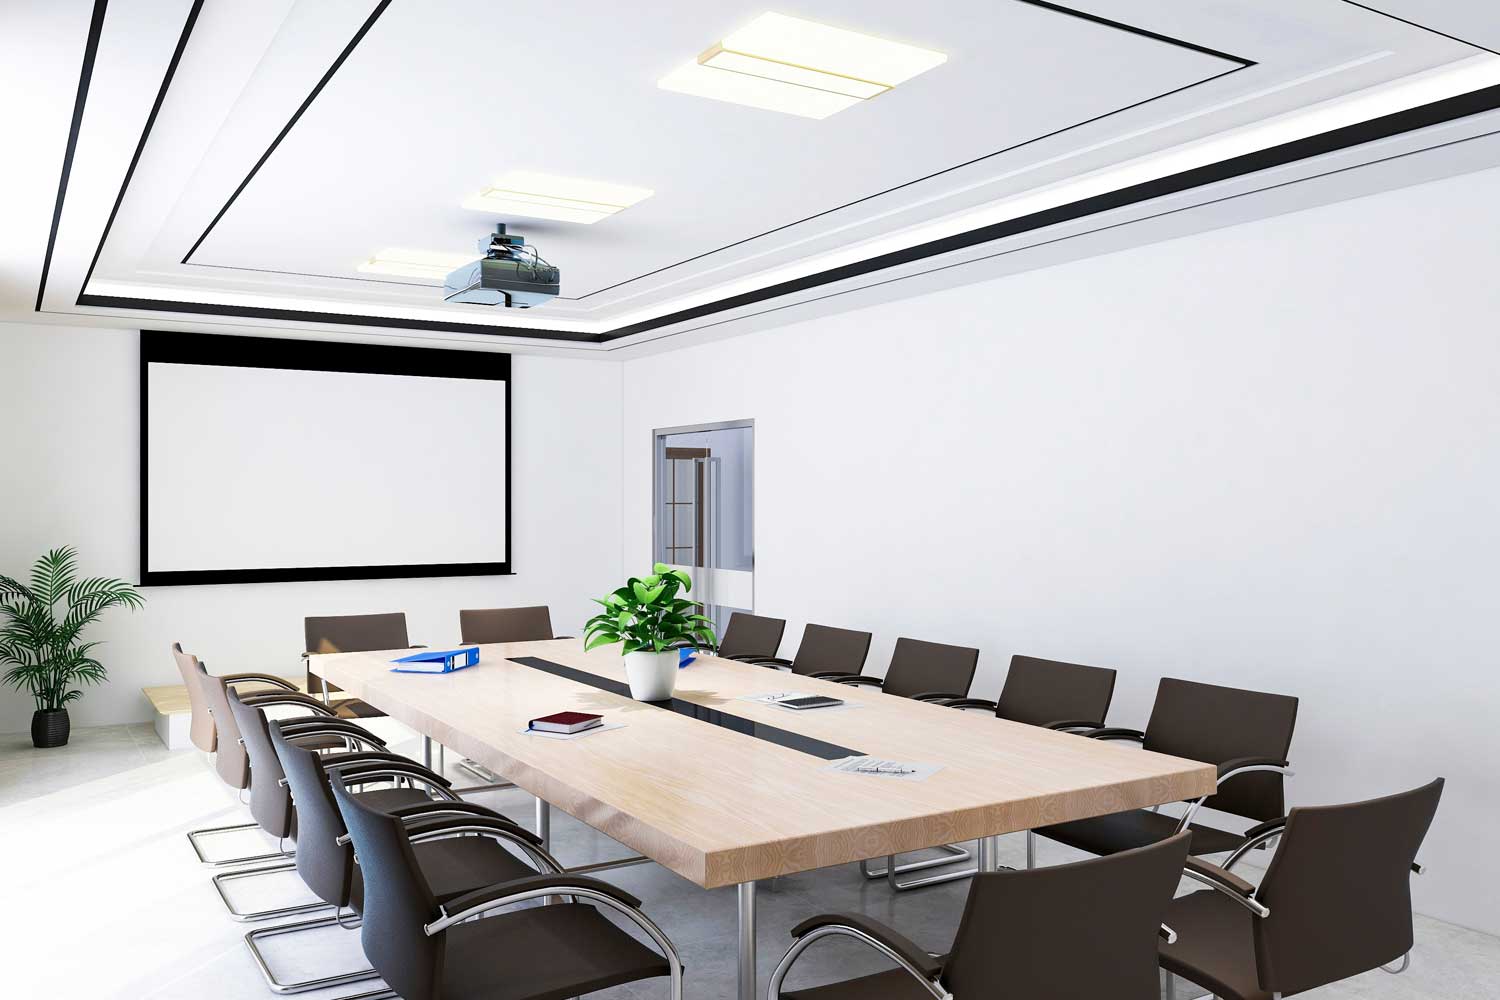 conference rooms blurb